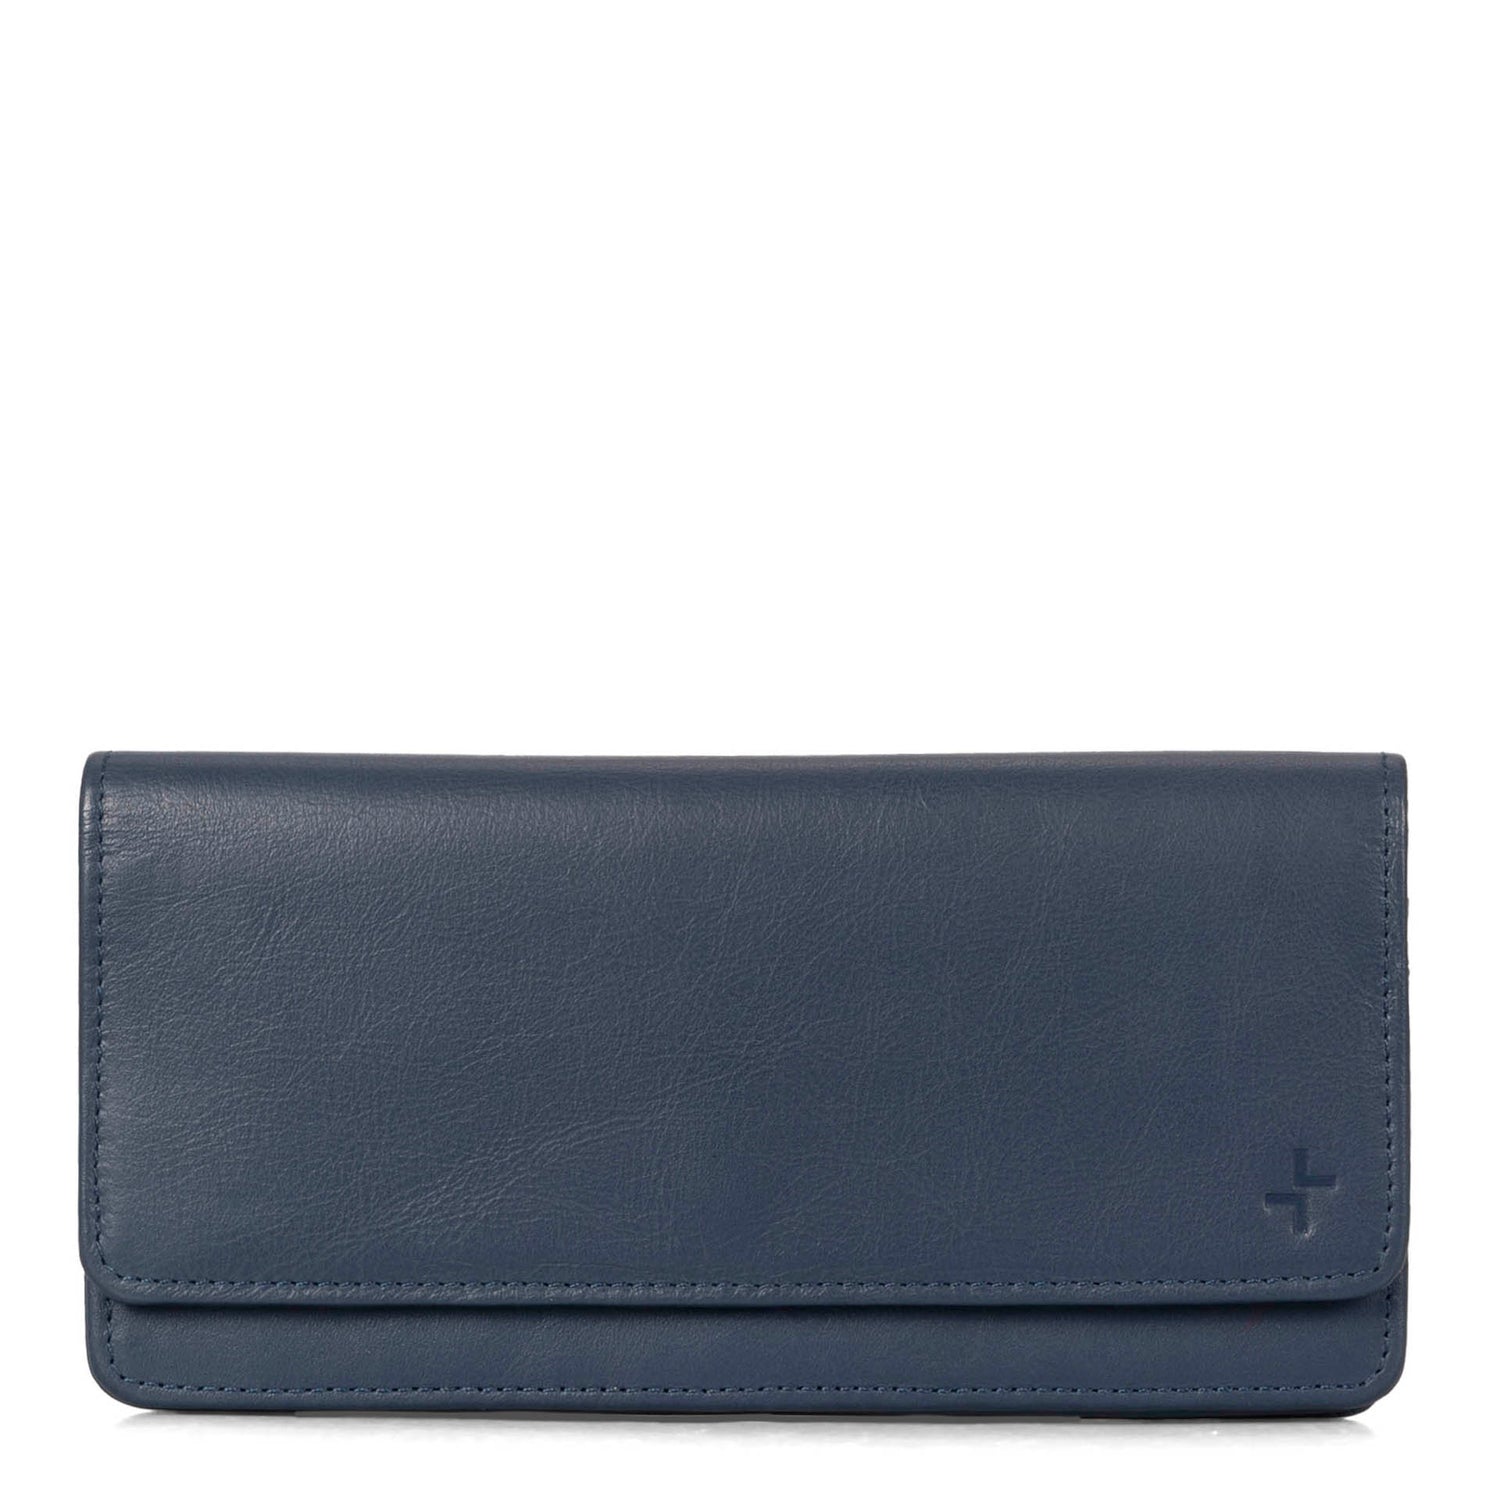 Front side of a blue women's wallet called Kelly designed by Tracker showing its leather texture and stitchings.